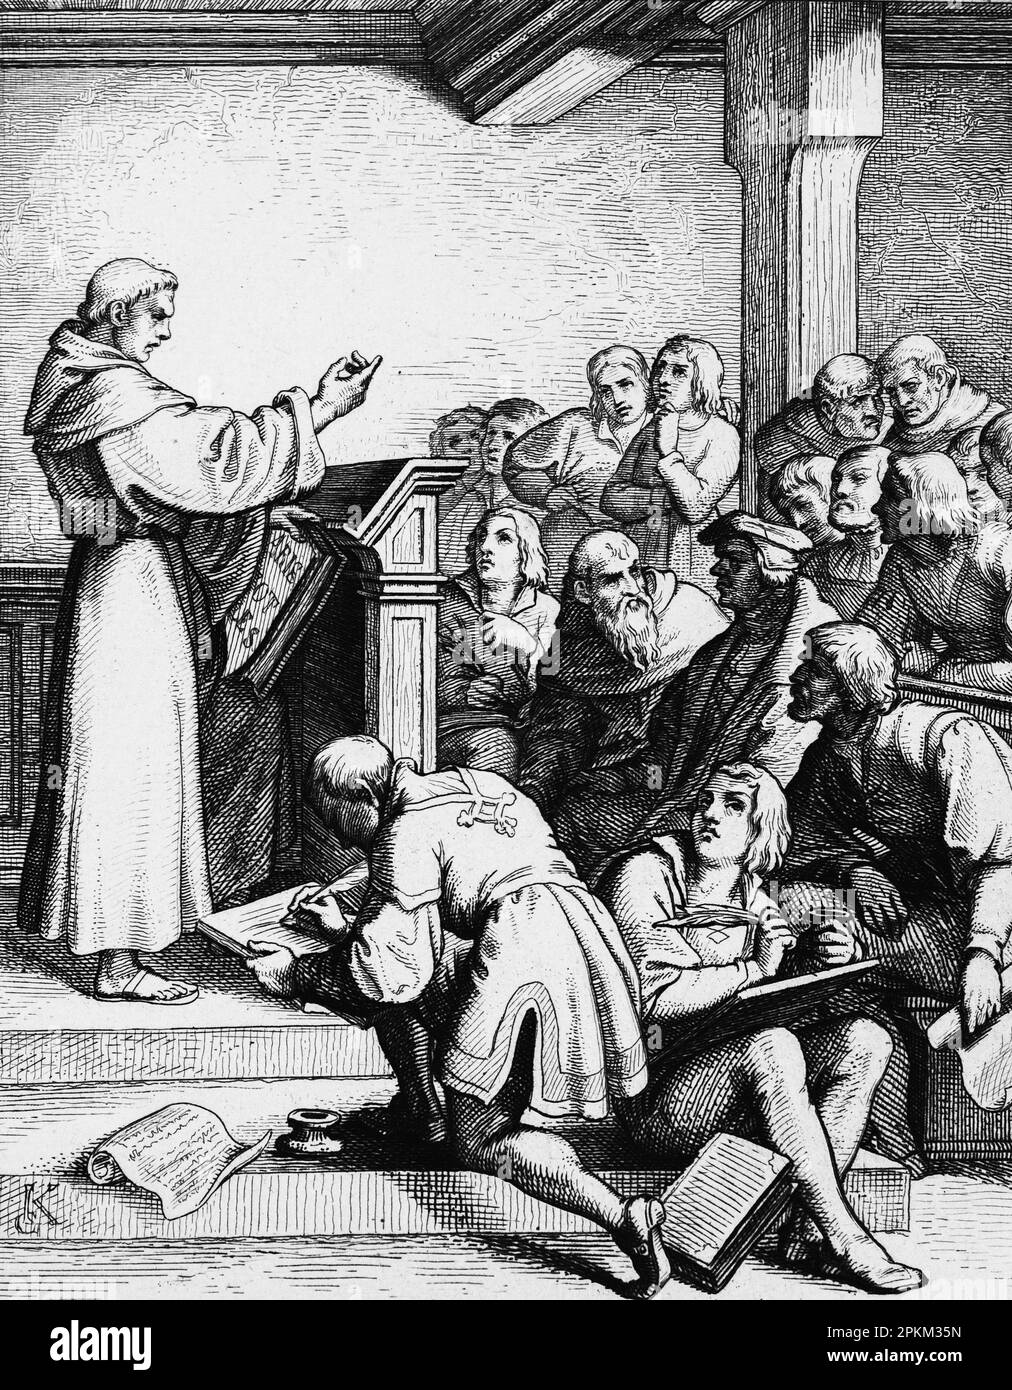 Martin Luther giving philosophical and theological lectures at Wittenberg University in 1508, historical illustration 1851 Stock Photo